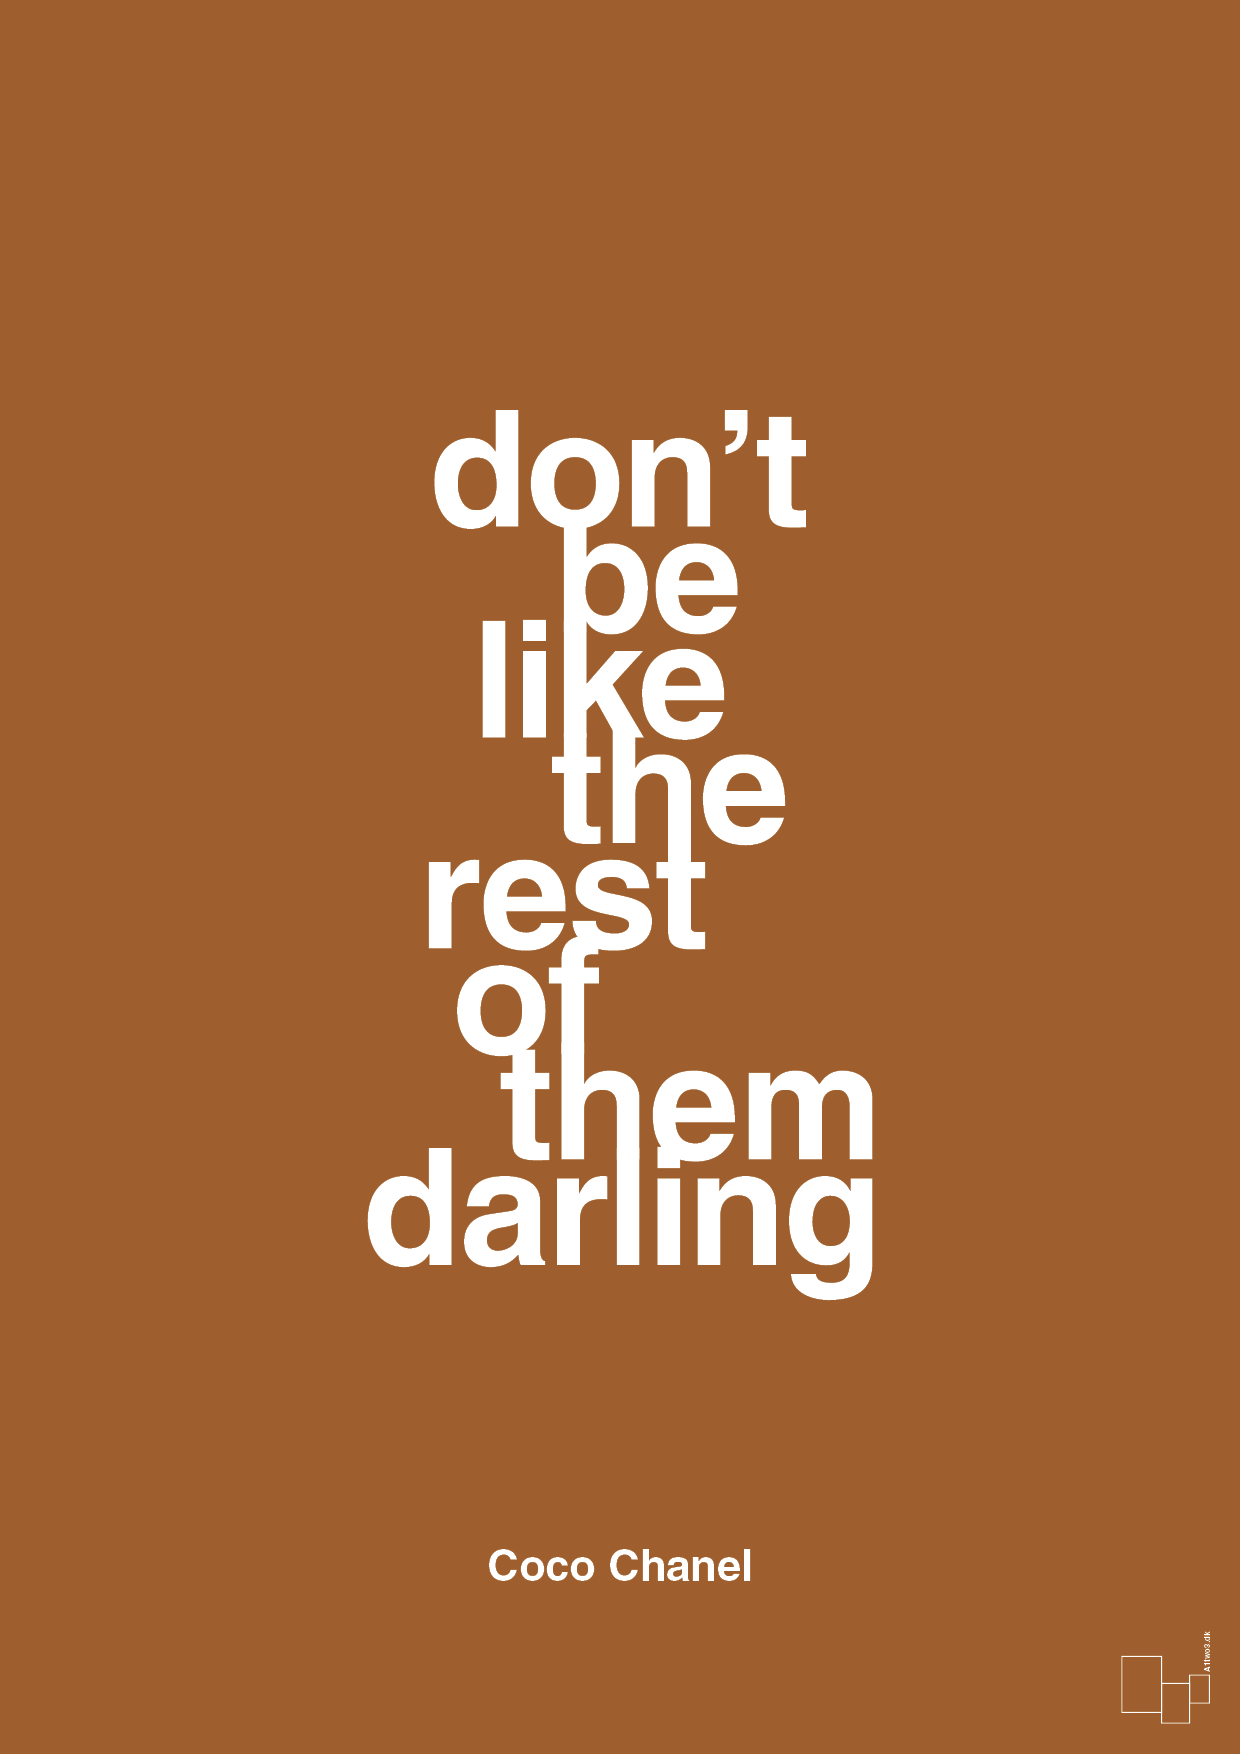 don’t be like the rest of them darling - Plakat med Citater i Cognac